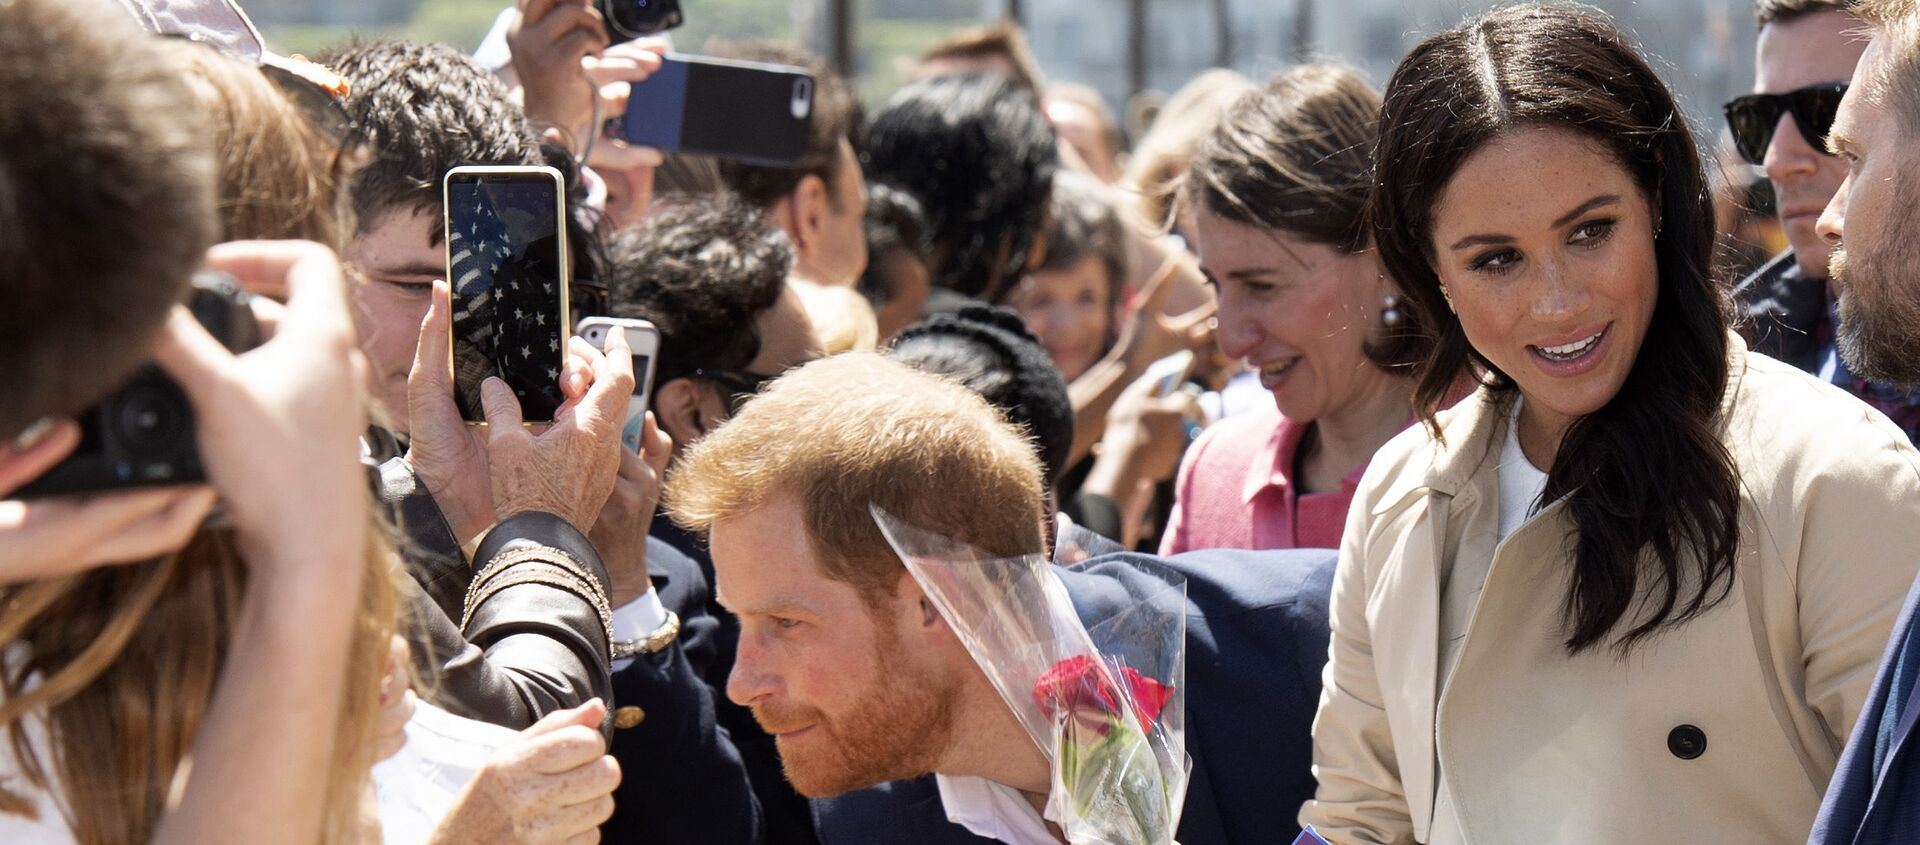 Britain's Prince Harry and Meghan, Duchess of Sussex meet members of the public during a walk about outside the Sydney Opera House in Australia on Tuesday, 16 October 2018. - Sputnik International, 1920, 07.06.2021